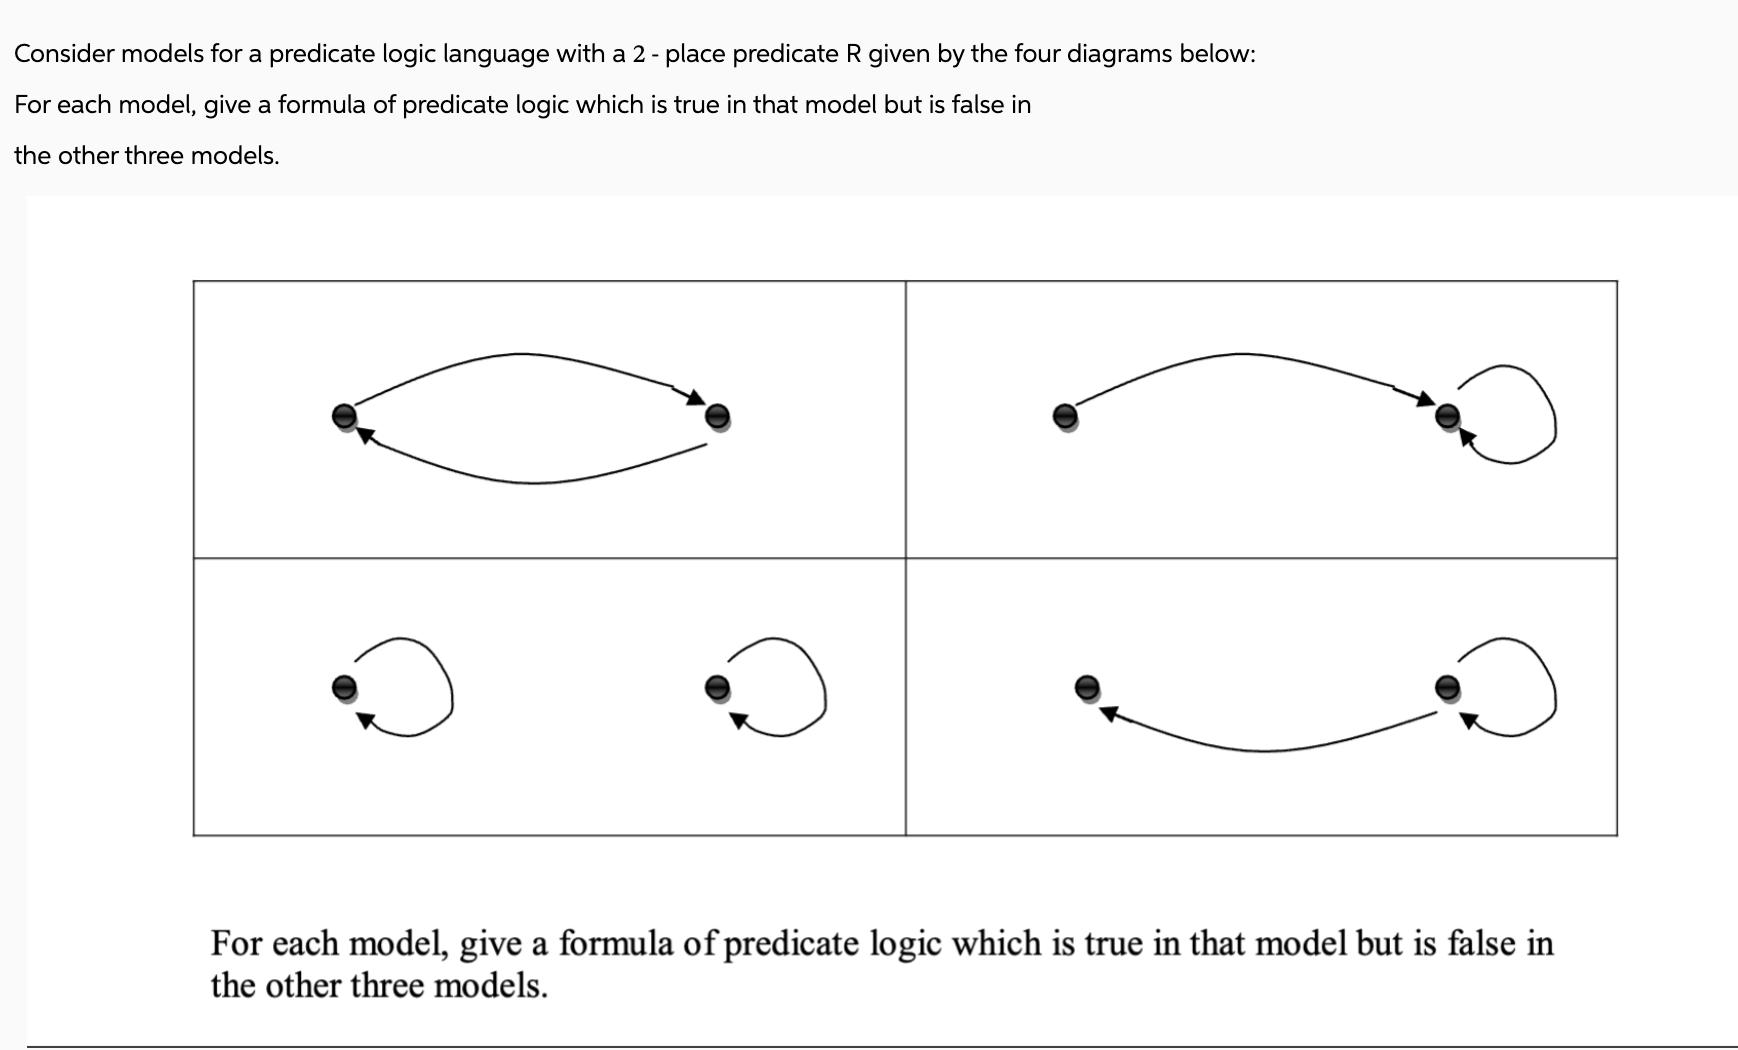 Consider models for a predicate logic language with a 2 - place predicate R given by the four diagrams below: